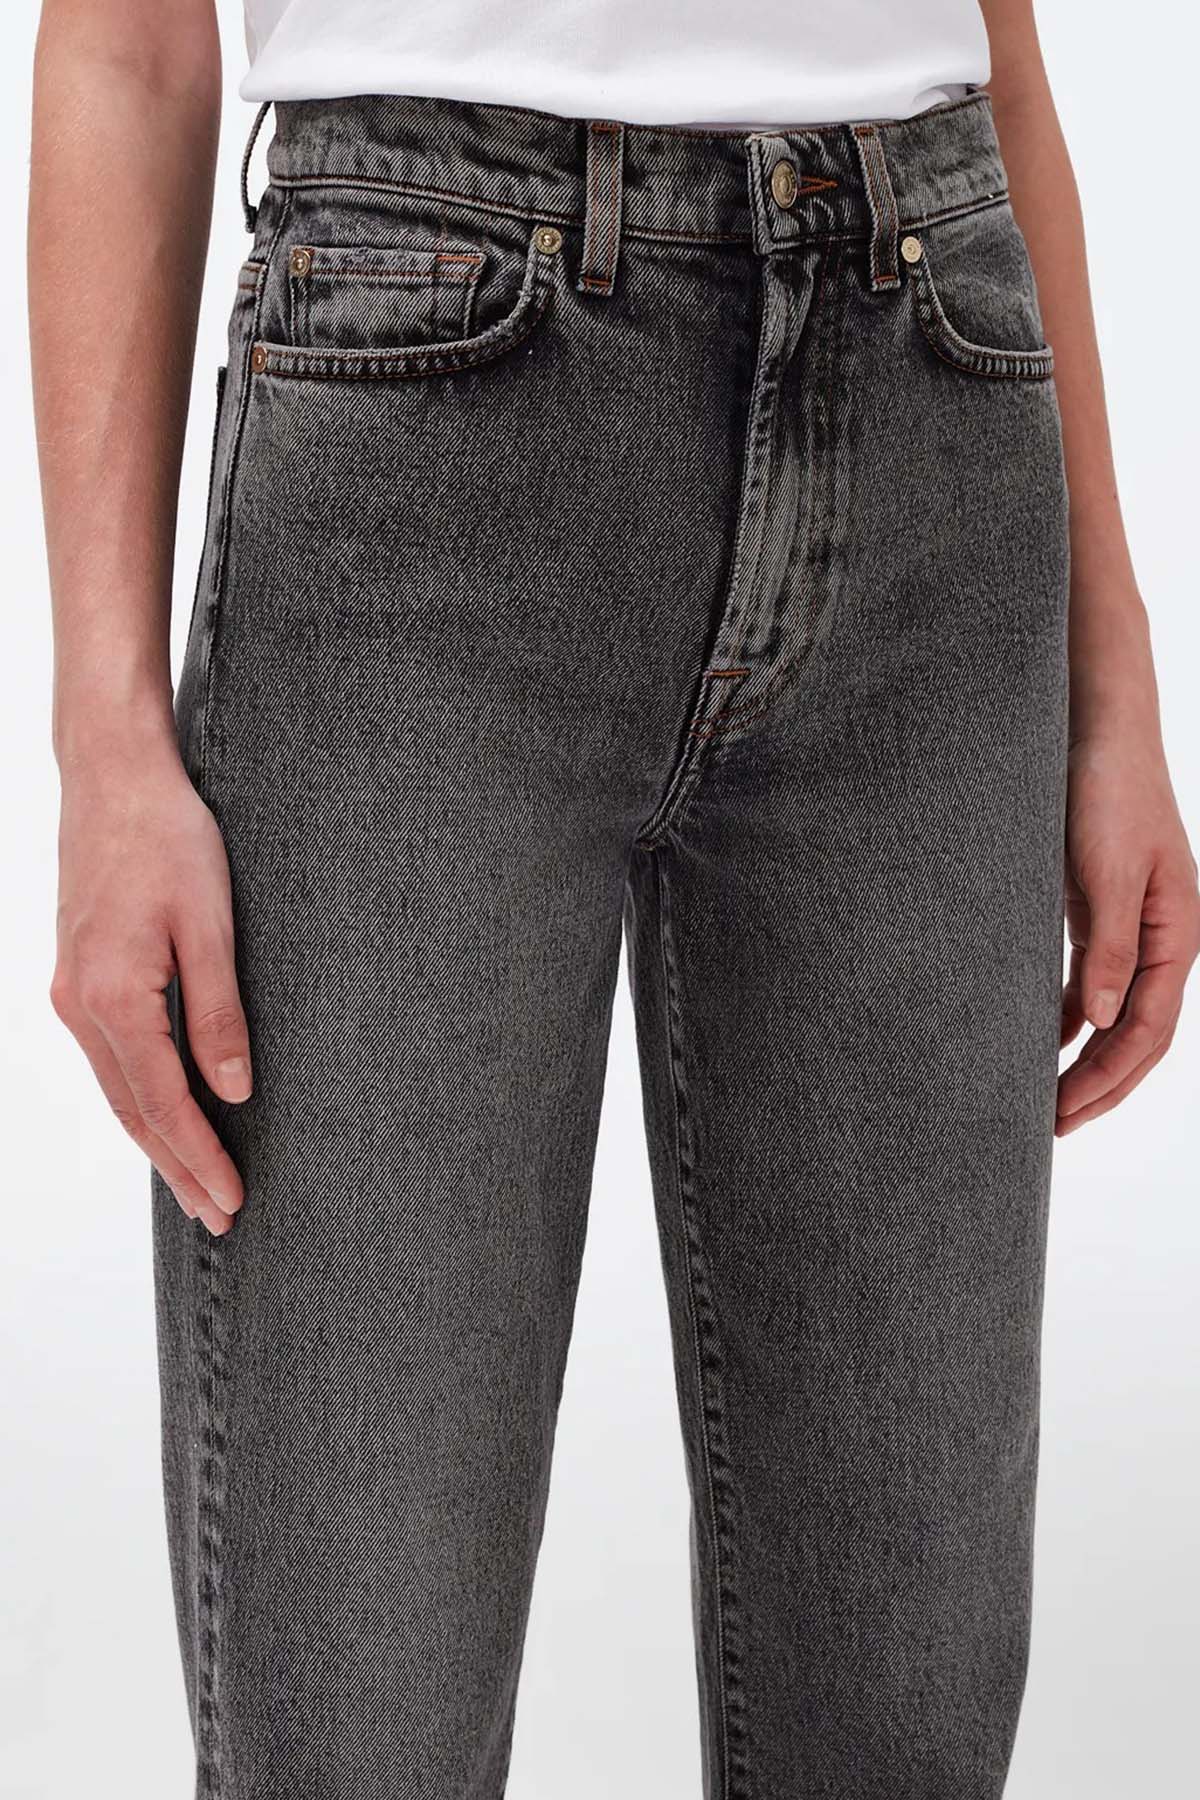 7 For All Mankind Tall Logan Stovepipe Straight Fit Jeans-Libas Trendy Fashion Store